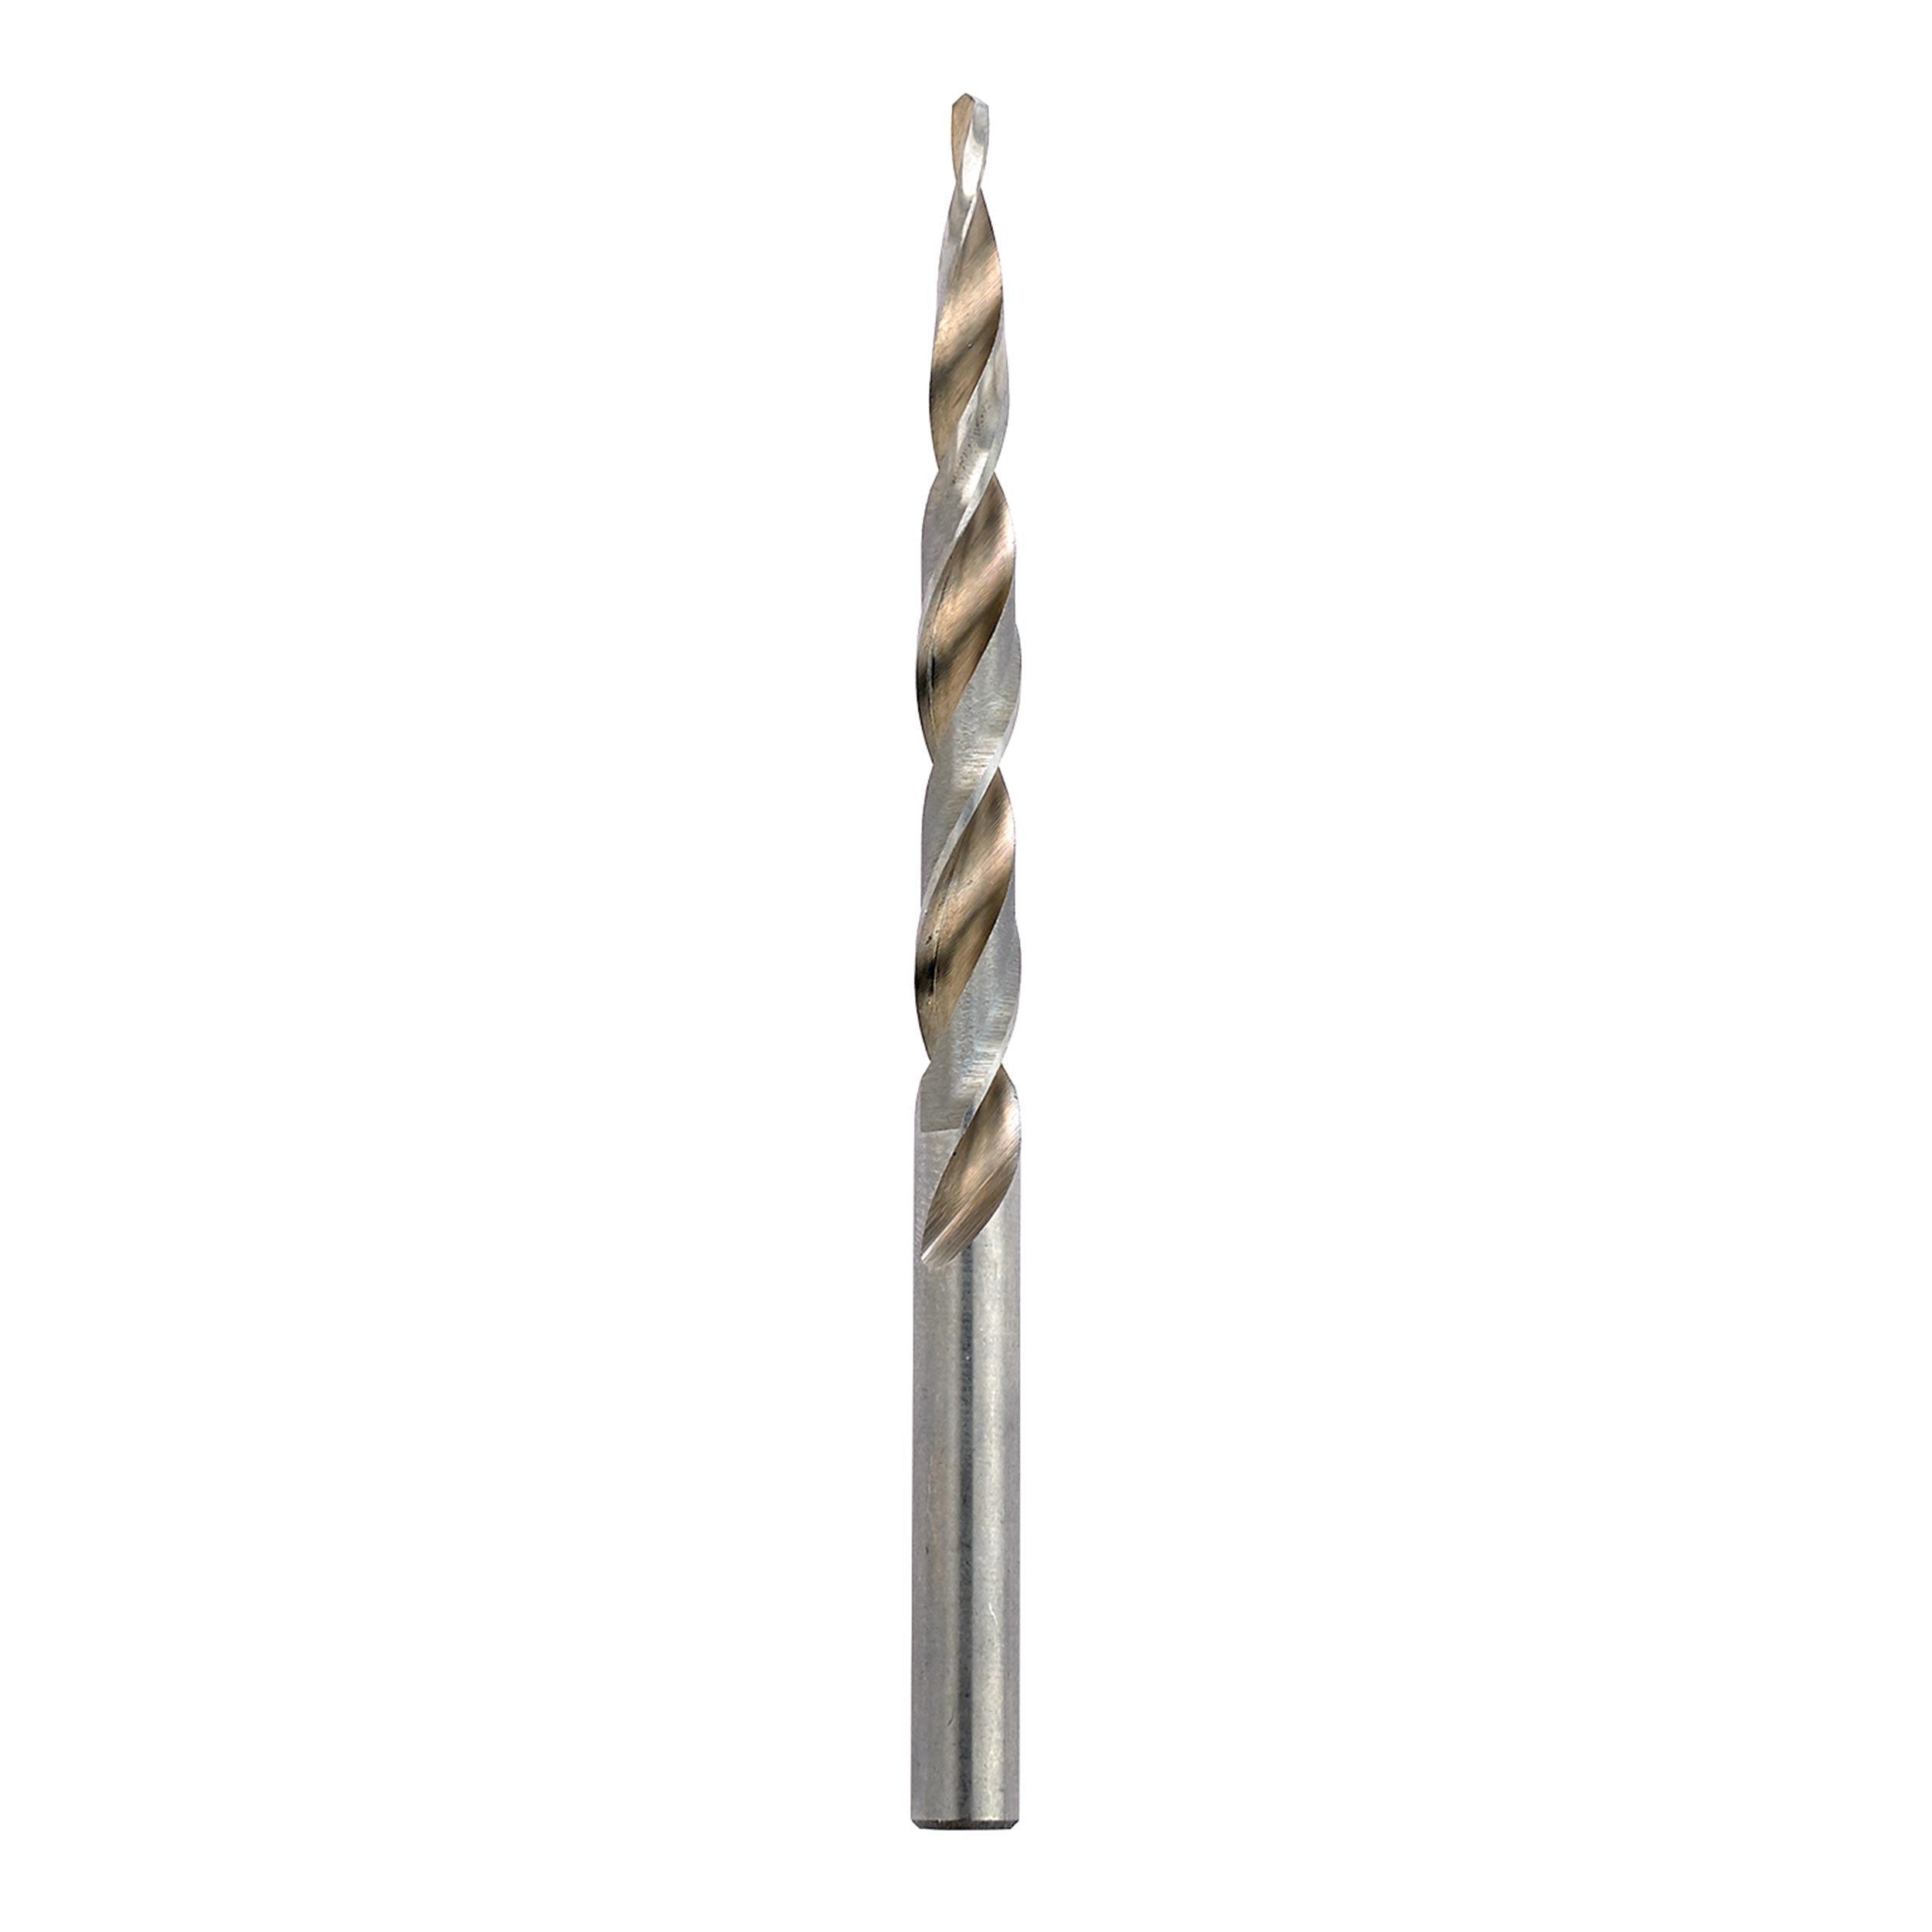 Replacement 1/4" Taper Drill Bit For #14 Screws